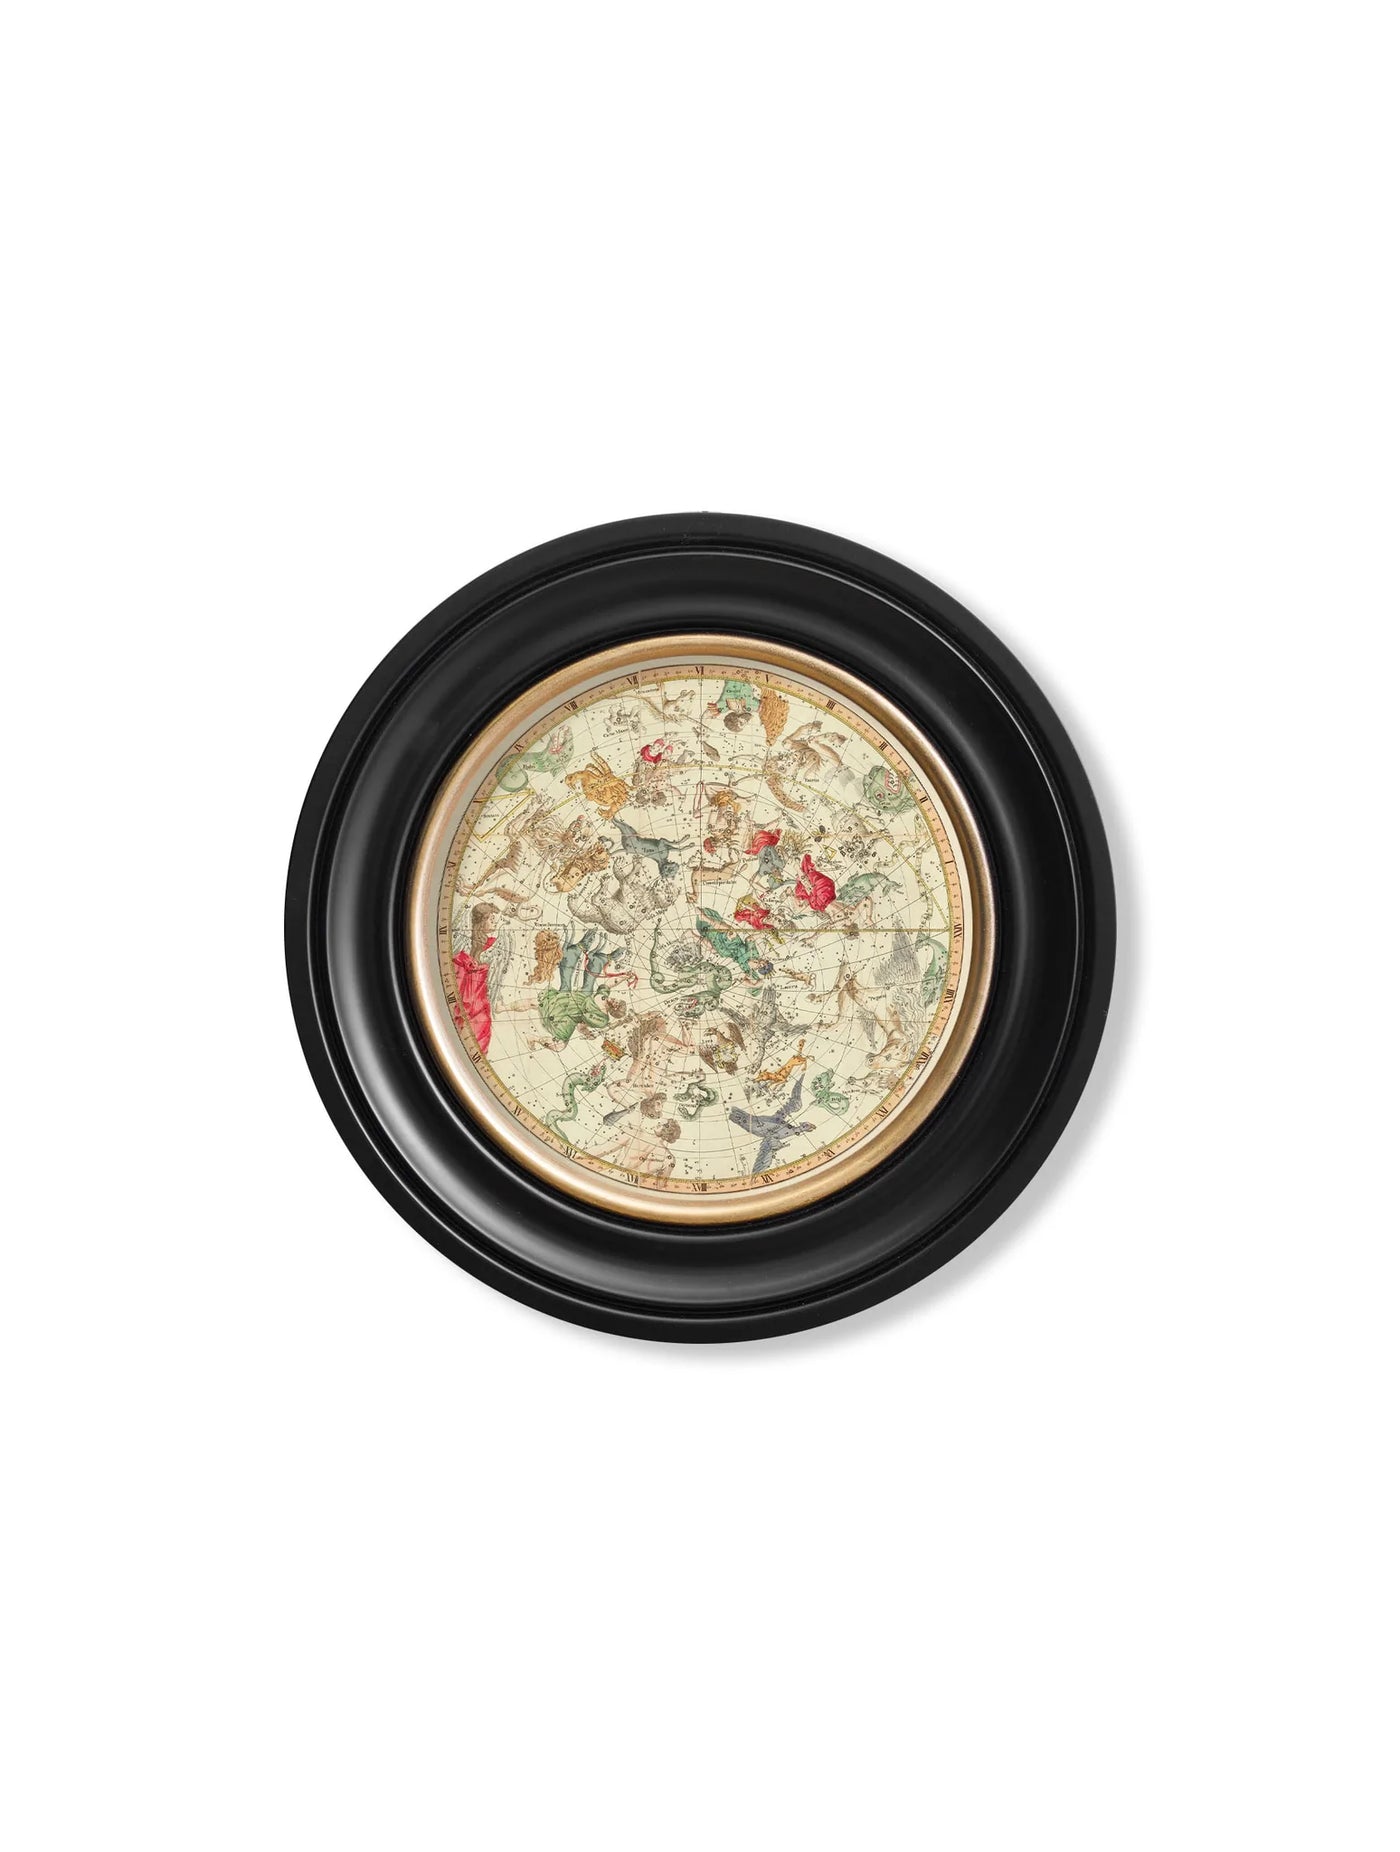 C.1820 MAP OF CONSTELLATIONS - ROUND FRAME - TheArtistsQuarter